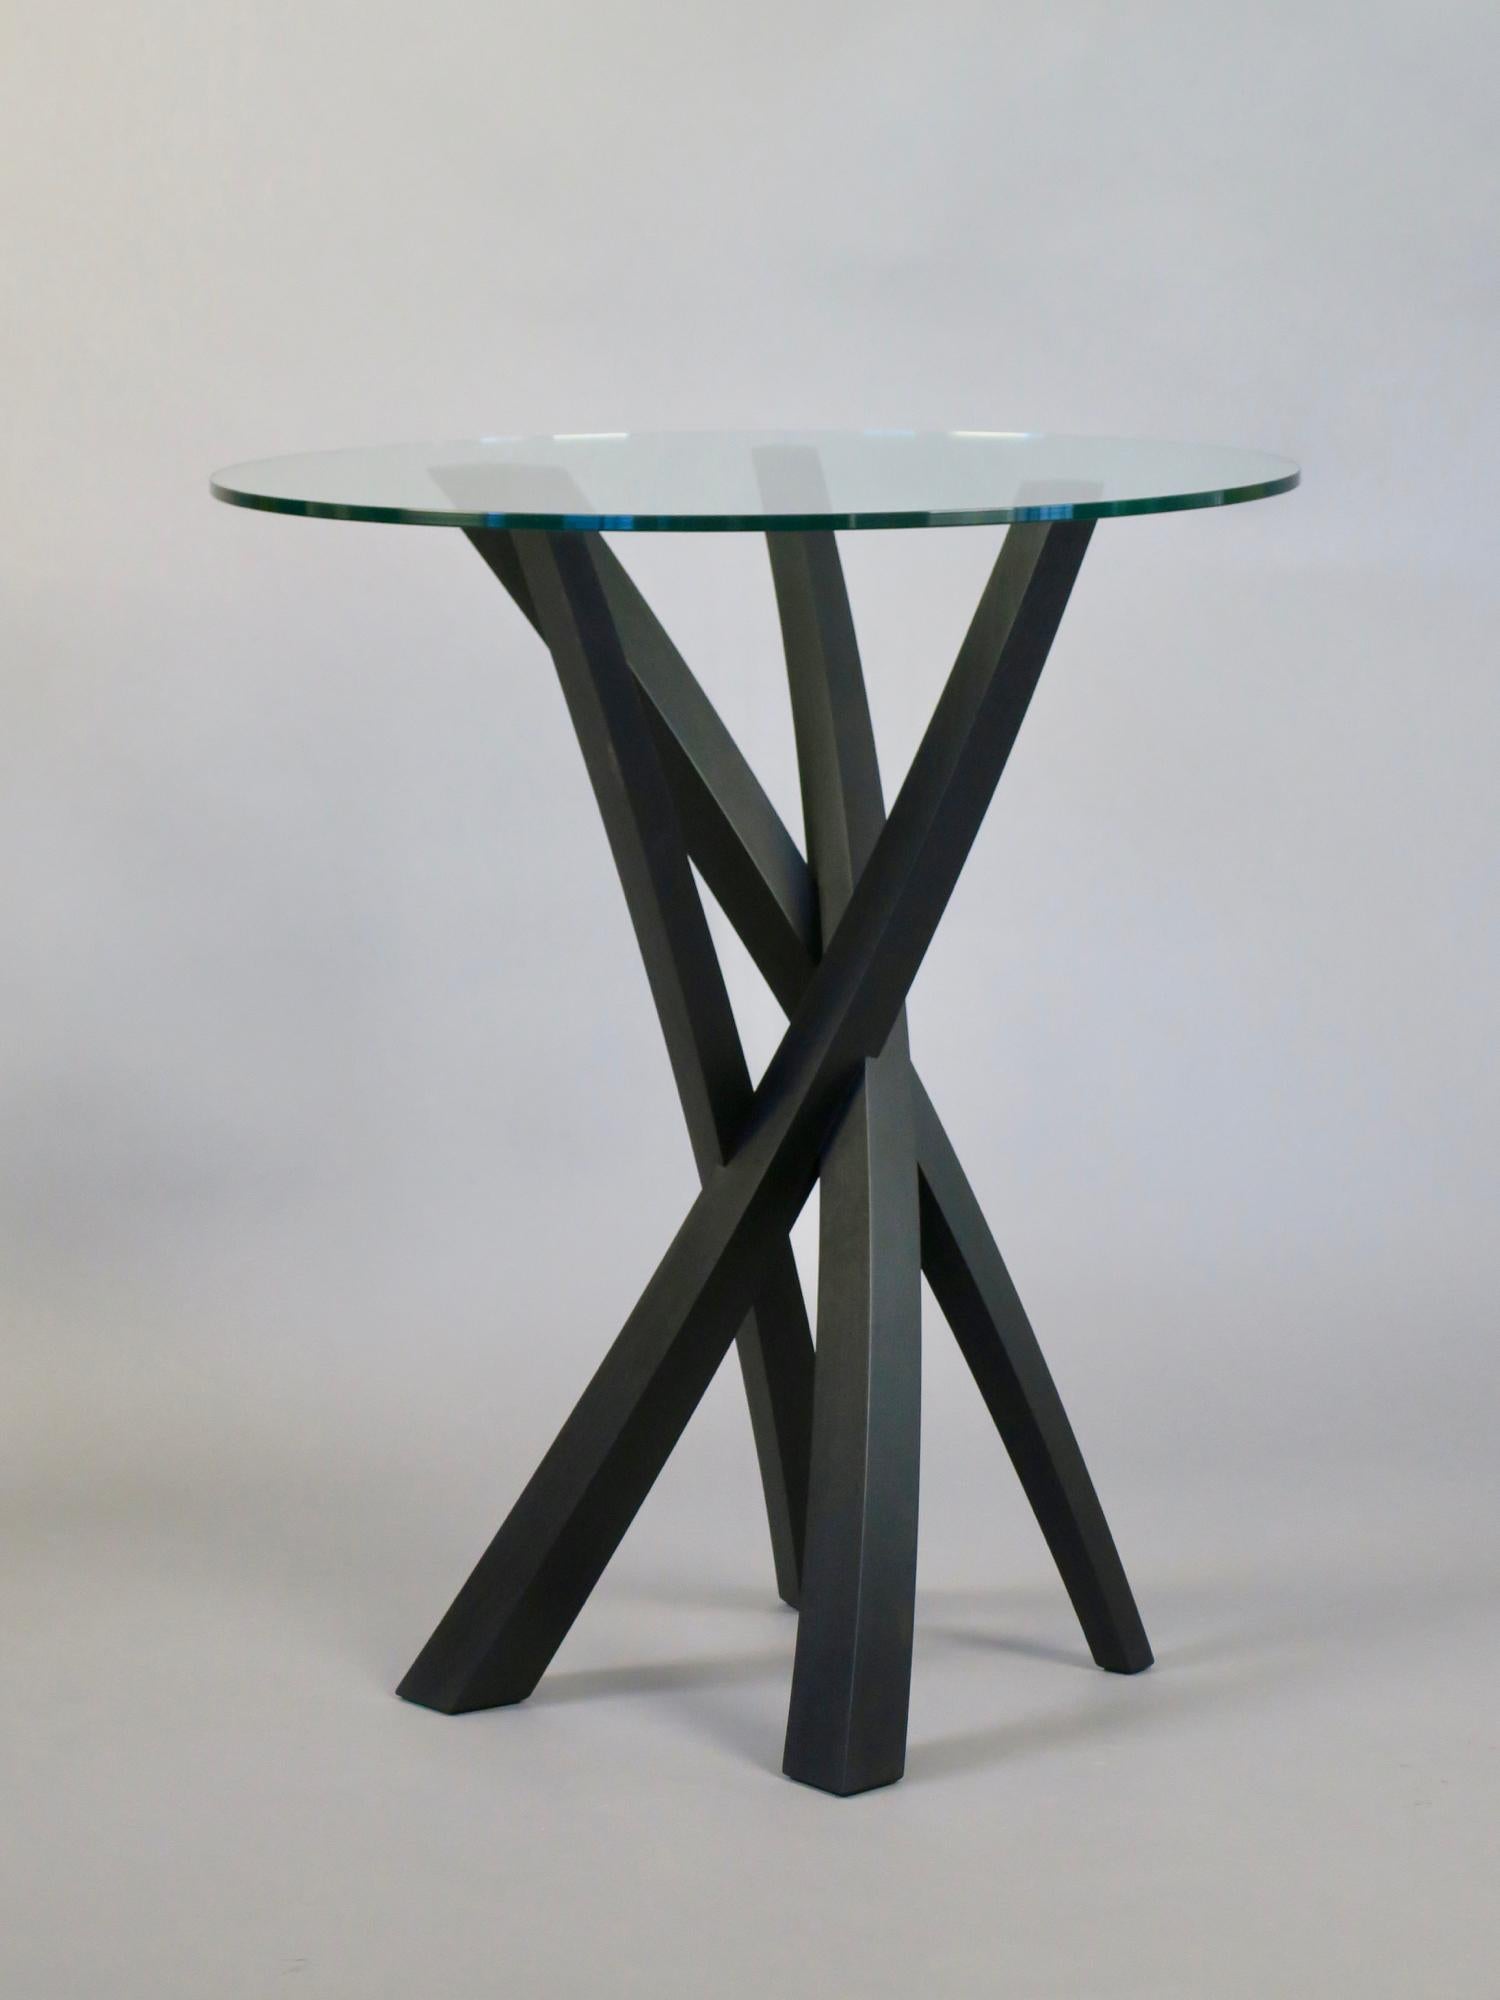 Contemporary Sculptural Walnut and Glass Side Table by Thomas Throop/ Black Creek Designs For Sale